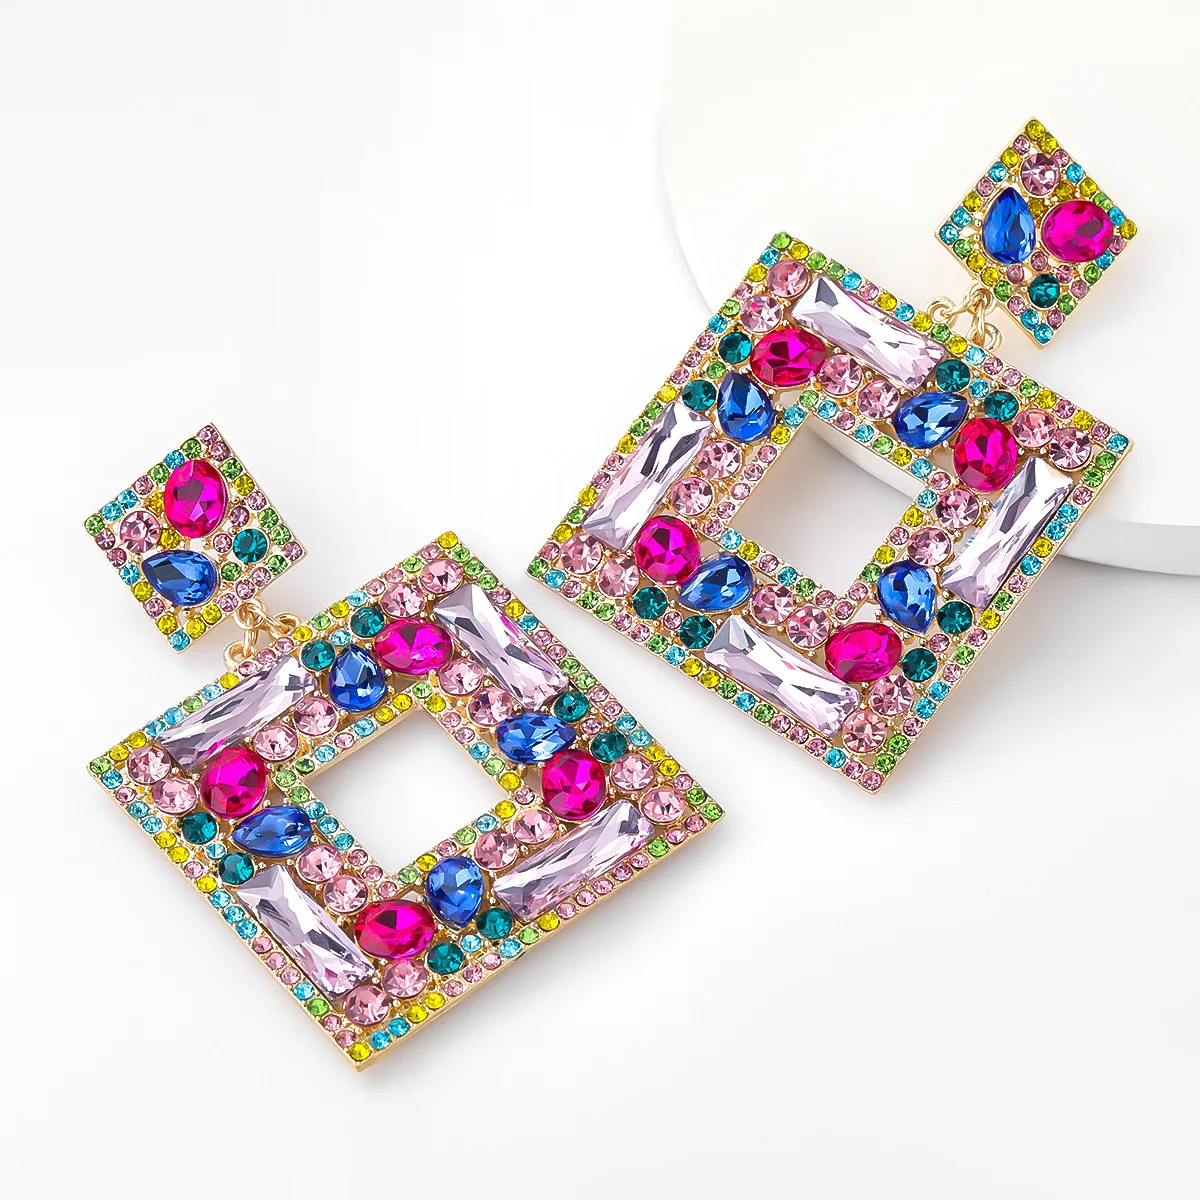 

Vintage Multi-color Bling Rhinestone Diamond Square Stud Earrings For Women 2021 Fashion Statement Earrings Jewelry, Picture shows